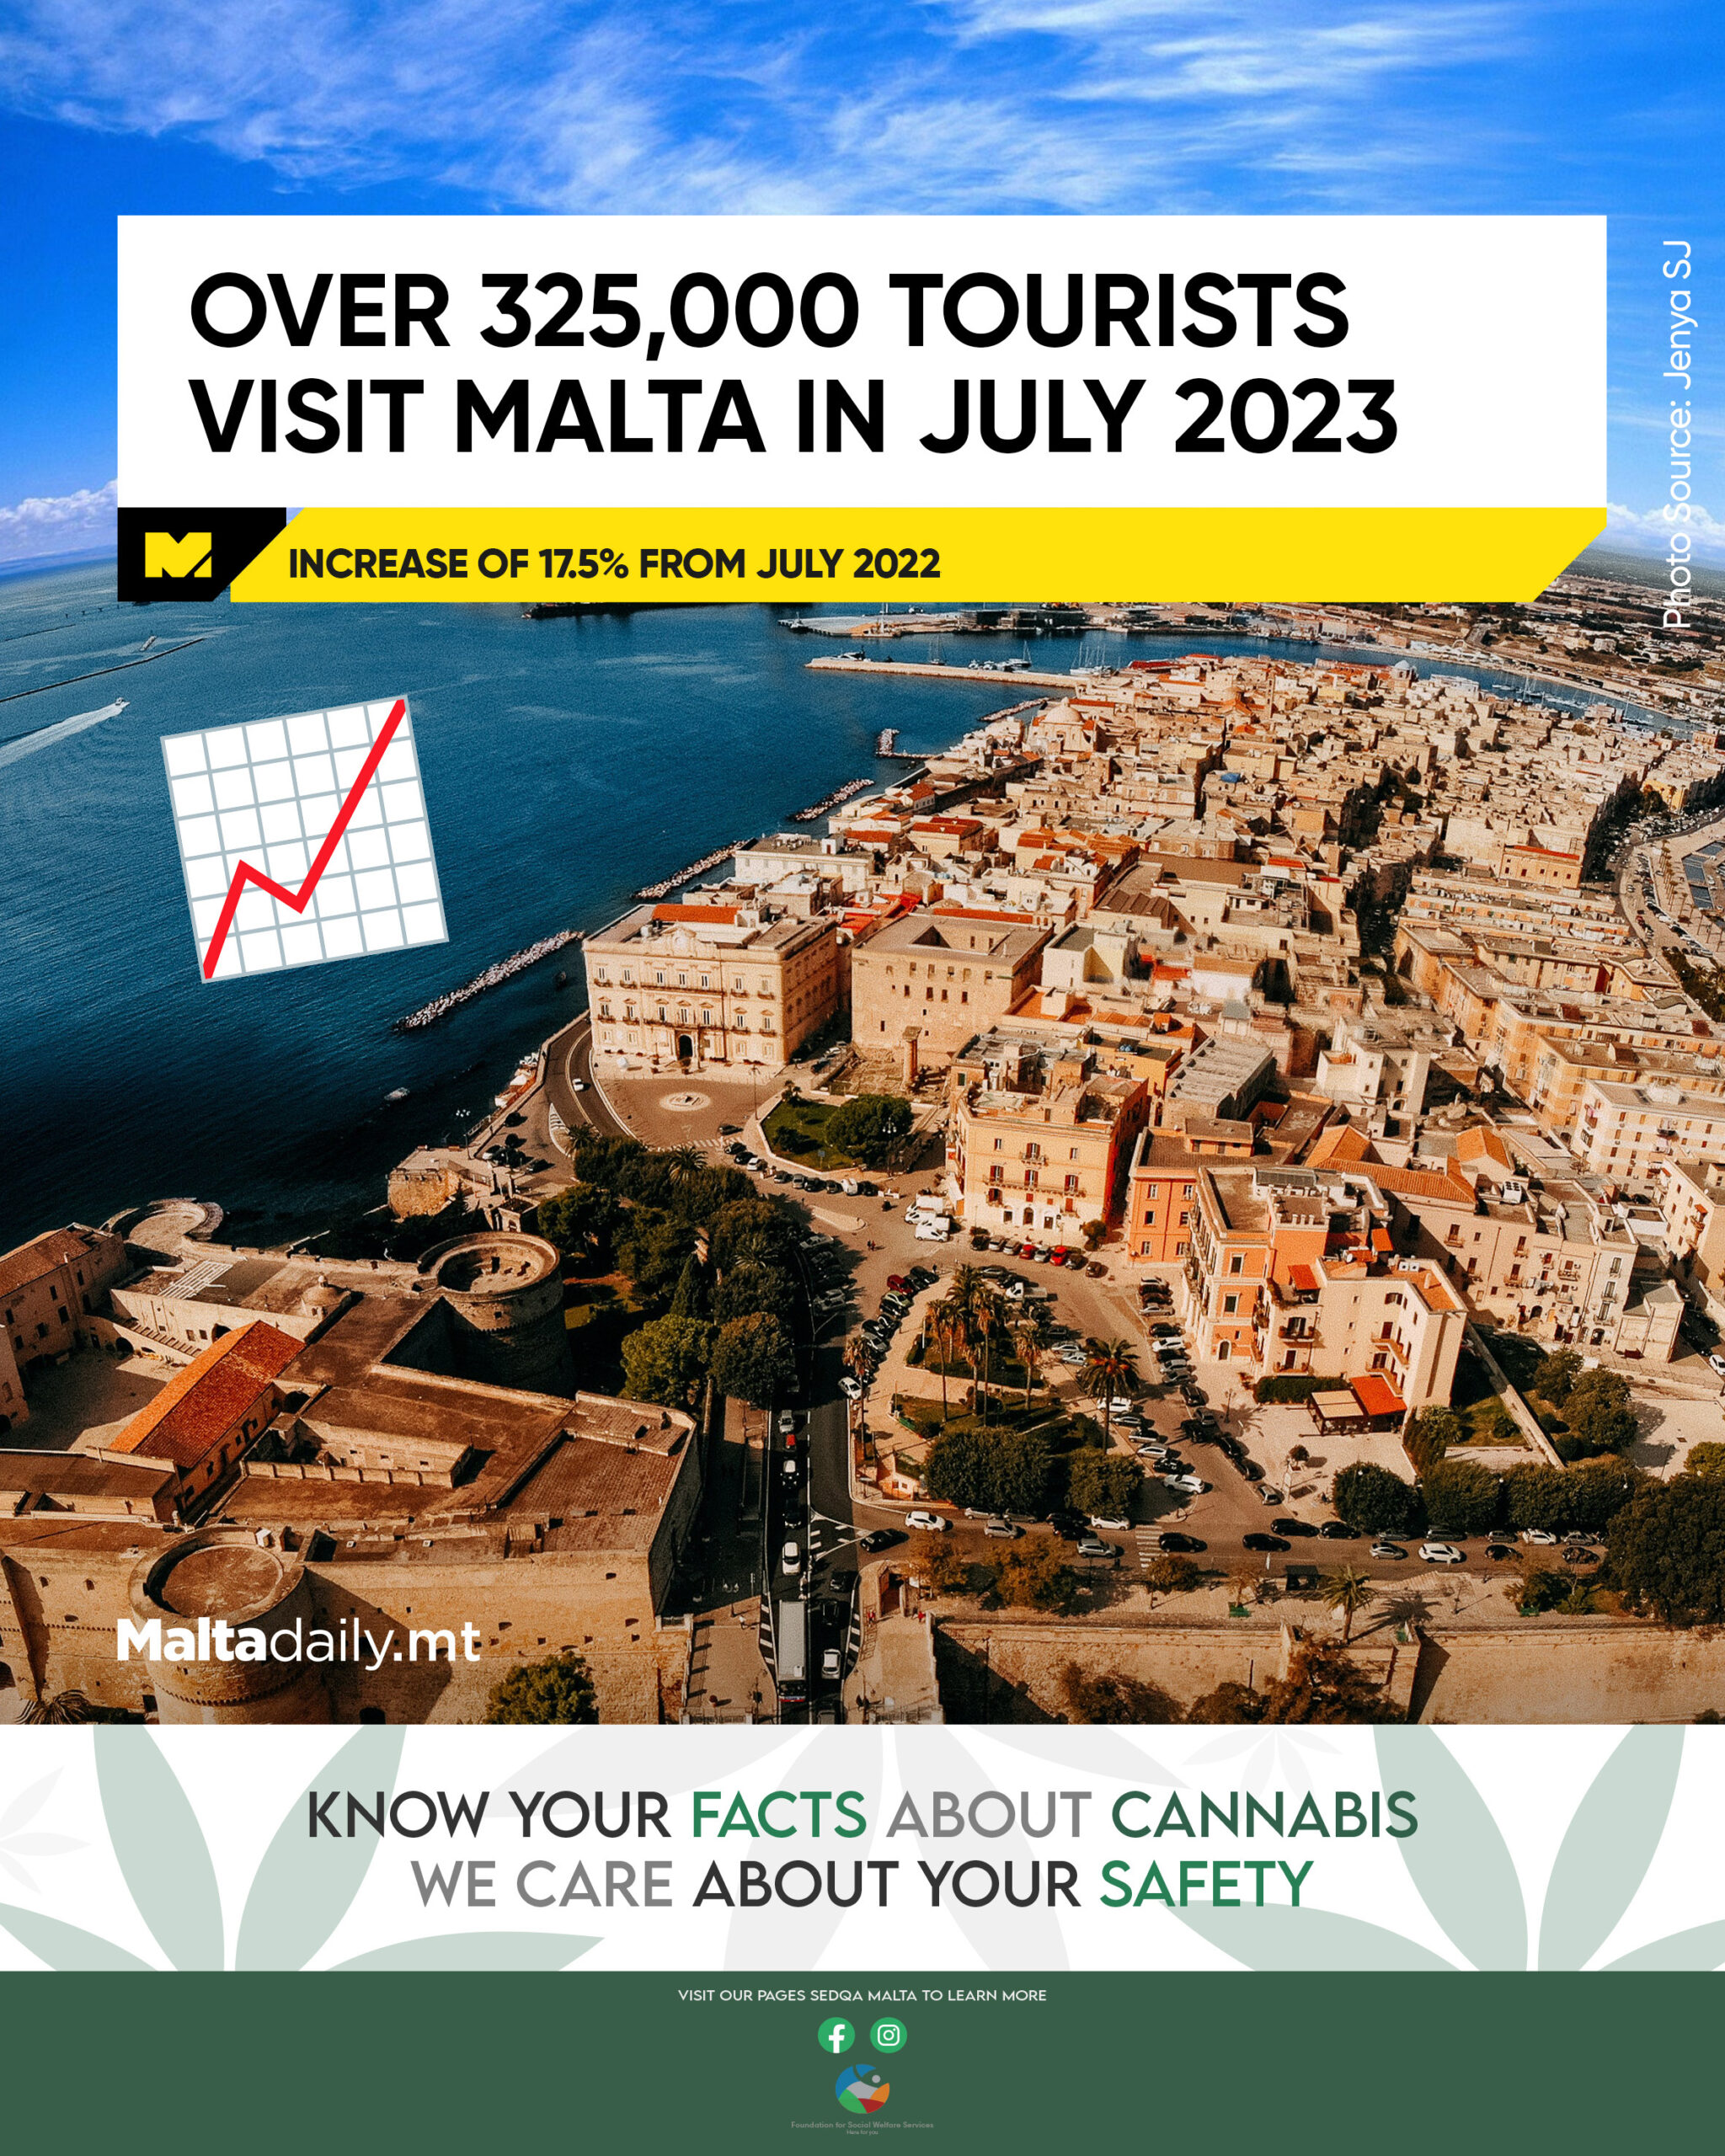 Over 325,000 Tourists Visit Malta in July 2023; Increase of 17.5% from 2022